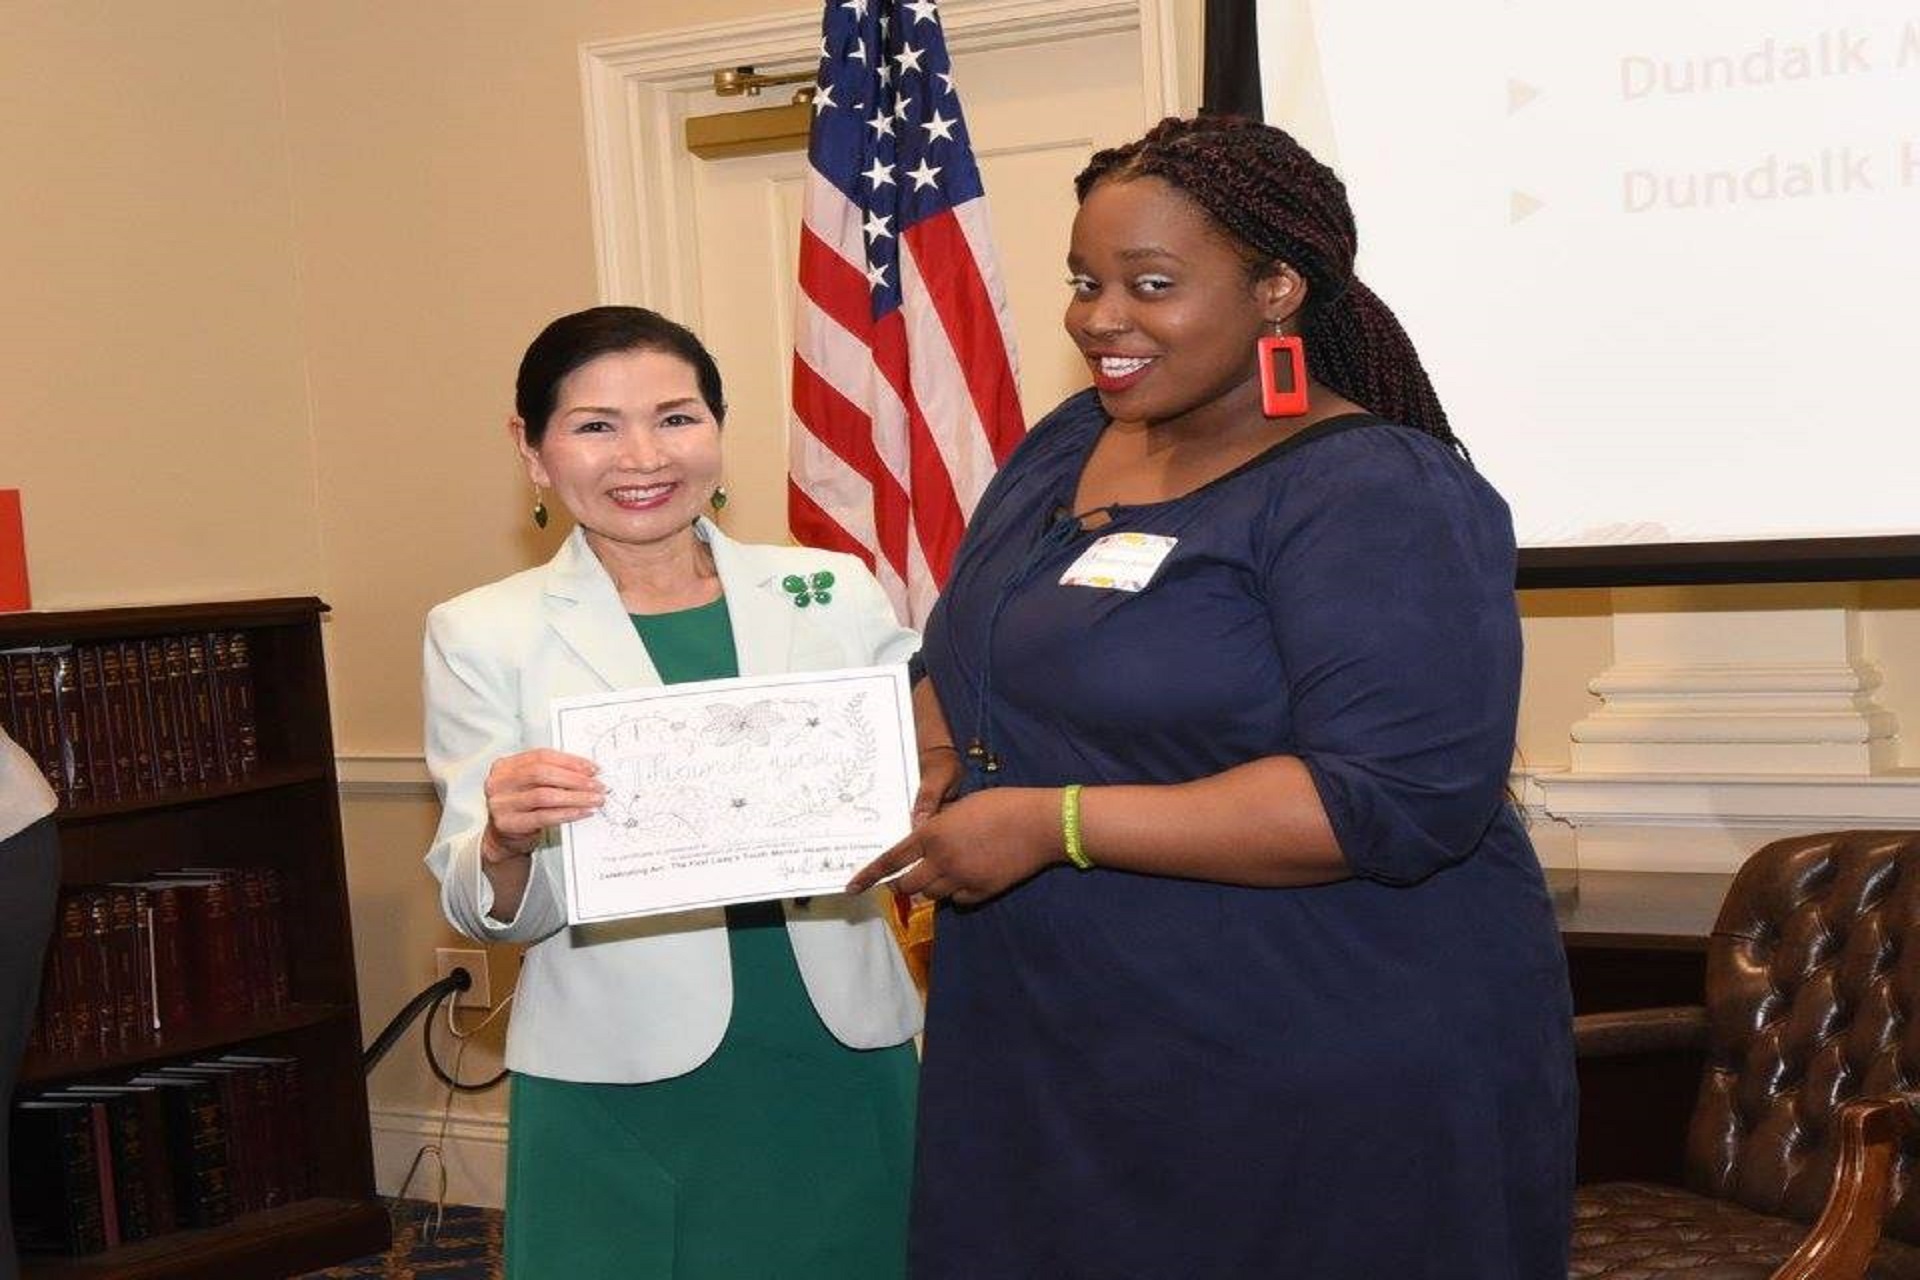 First Lady Yumi Hogan with TFS student Yasmeine Ford

Photo Credit: Office of Governor Larry Hogan